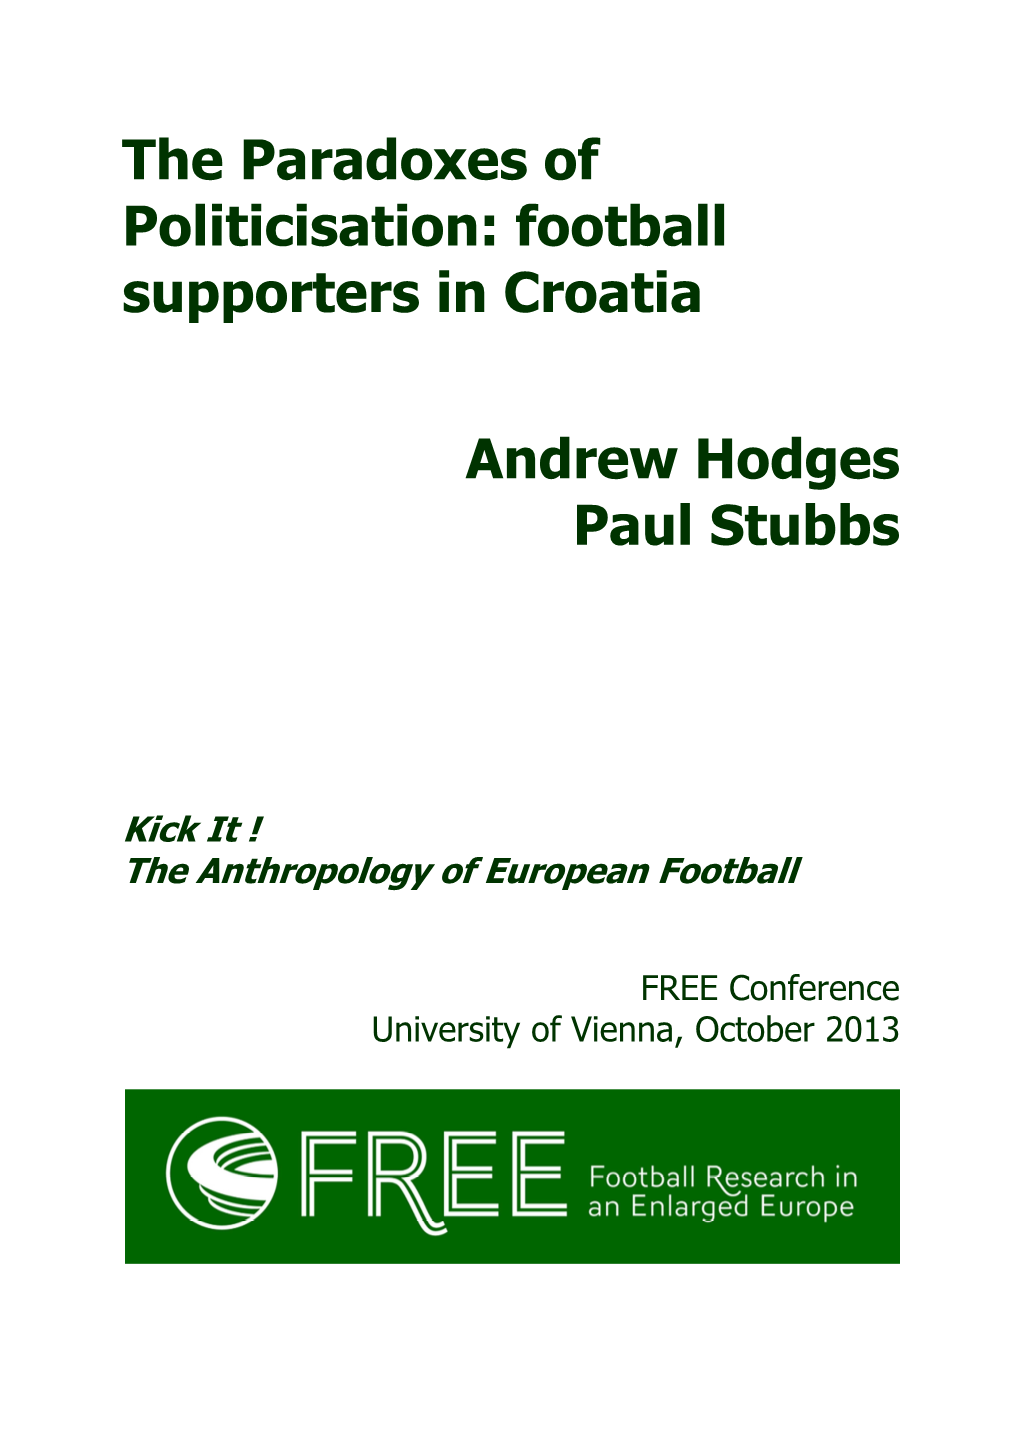 The Paradoxes of Politicisation Football Supporters in Croatia (A